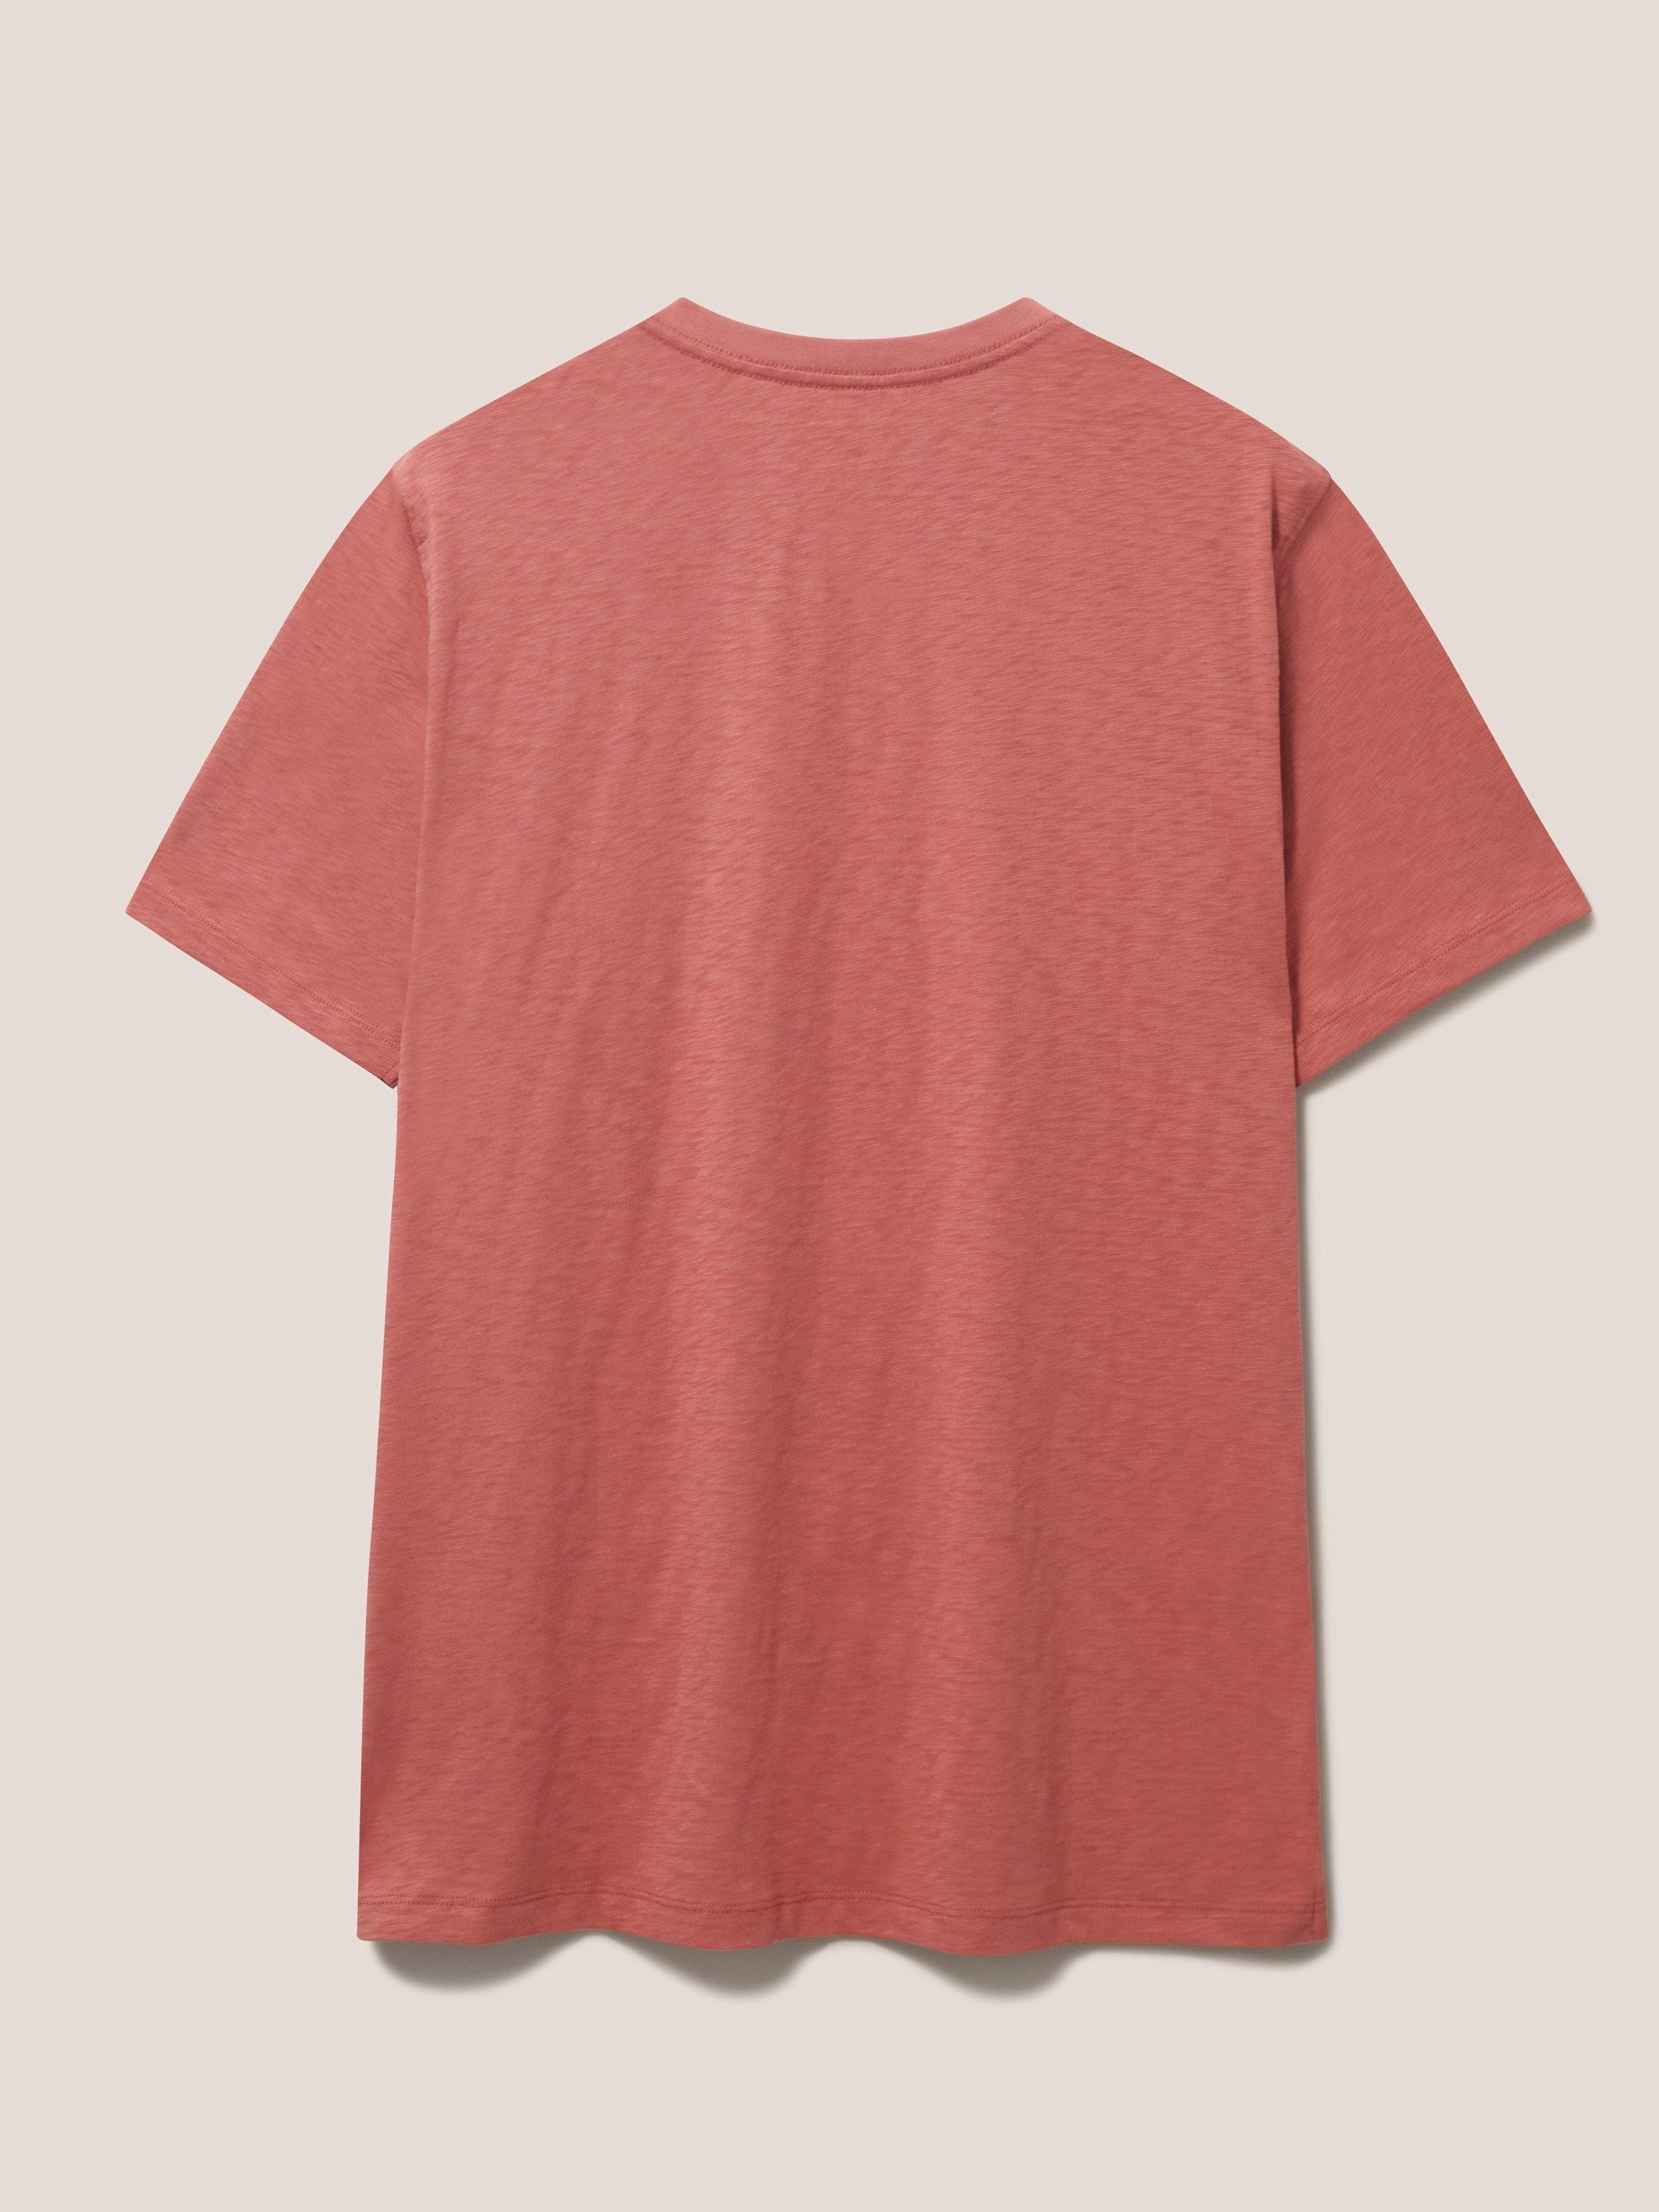 Fish Graphic Tee in DK PINK - FLAT BACK